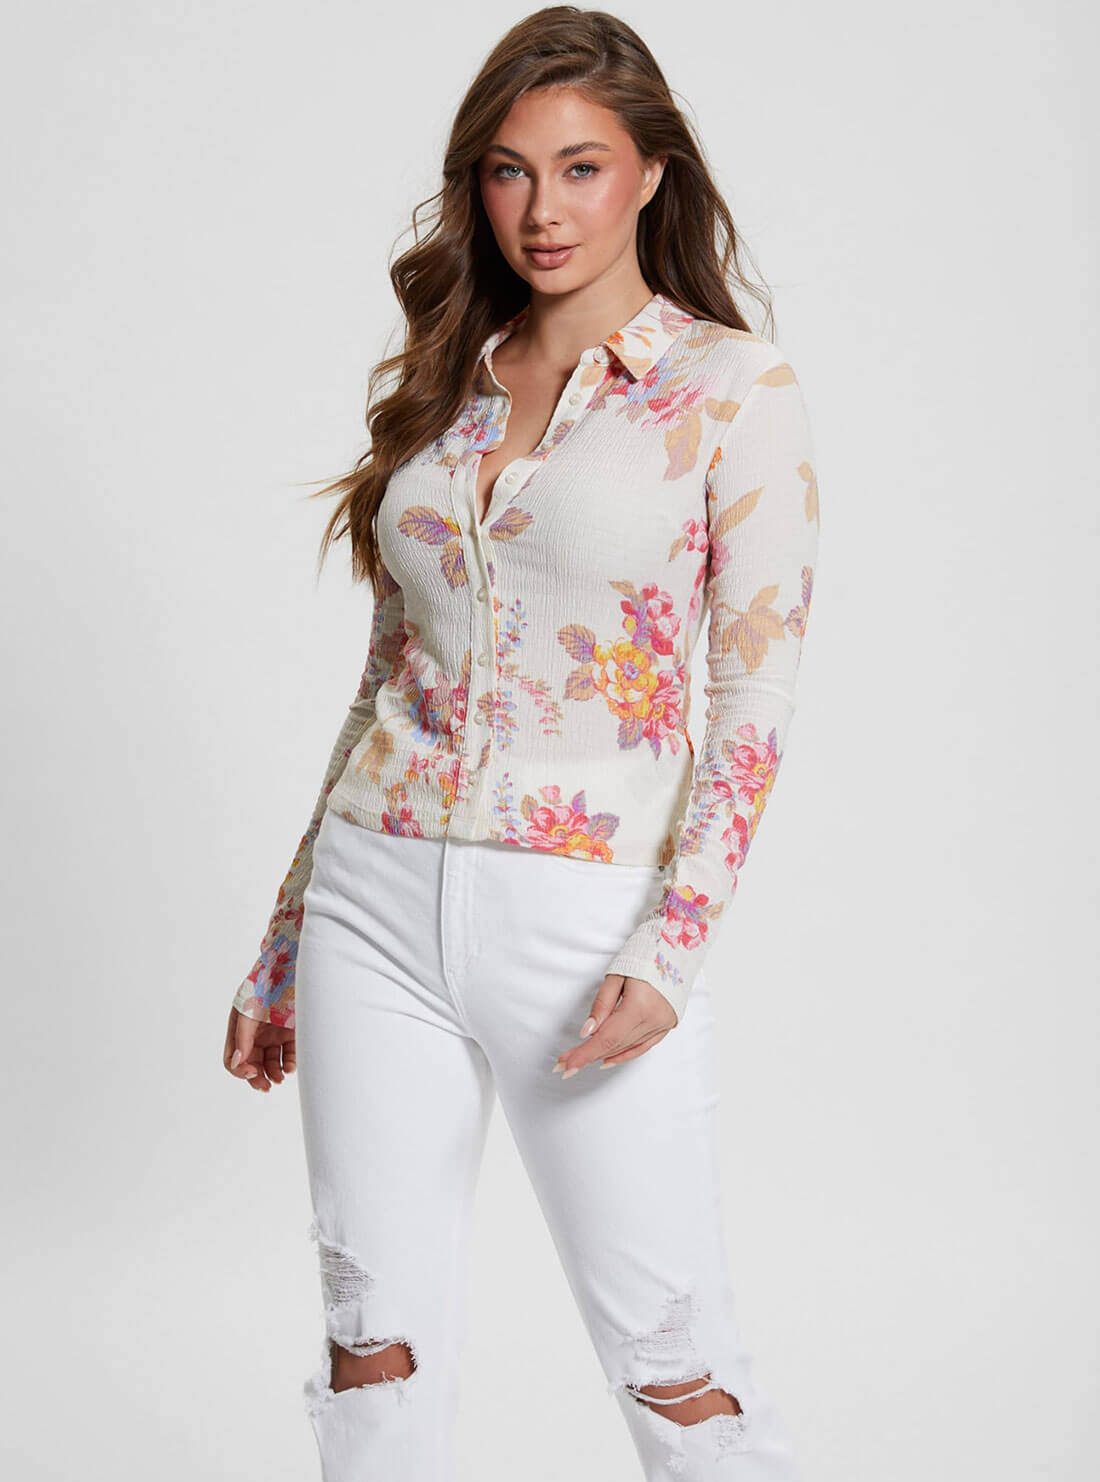 White Floral Tessa Long Sleeve Top | GUESS Women's Apparel | front view